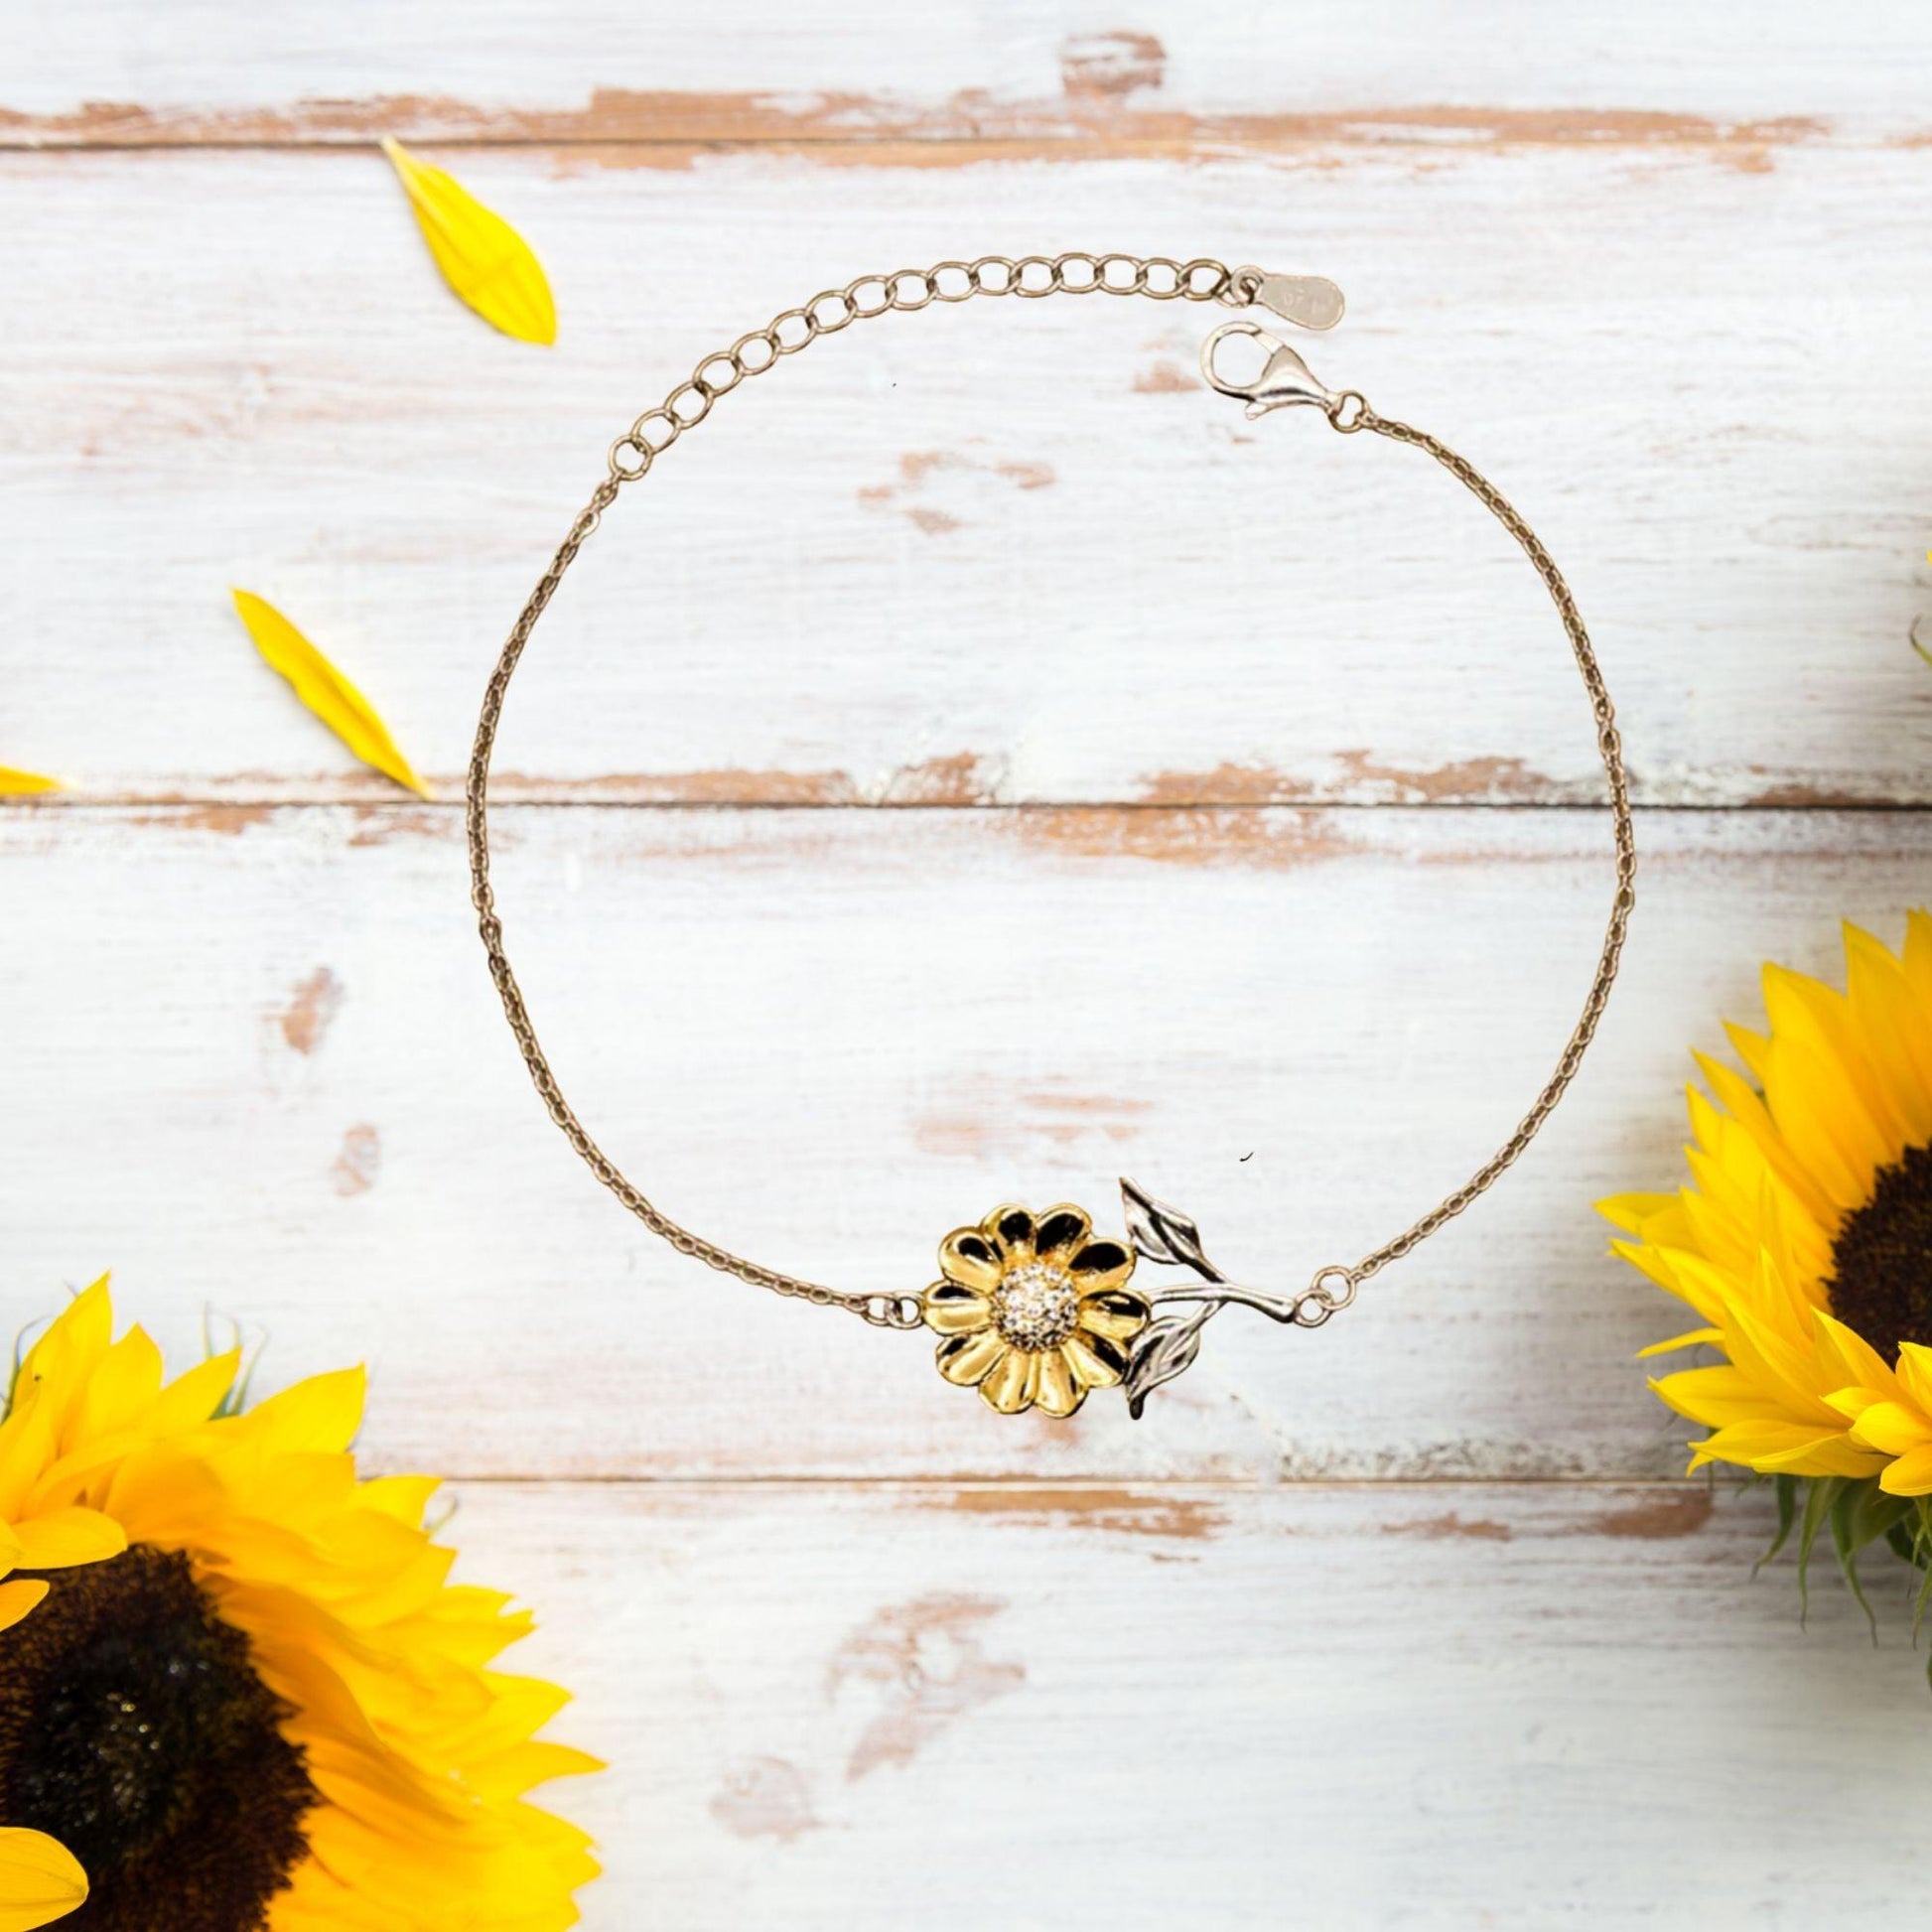 To My Brother Gifts, Inspirational Brother Sunflower Bracelet, Sentimental Birthday Christmas Unique Gifts For Brother Behind you, all your memories, before you, all your dreams, around you, all who love you, within you, all you need - Mallard Moon Gift Shop